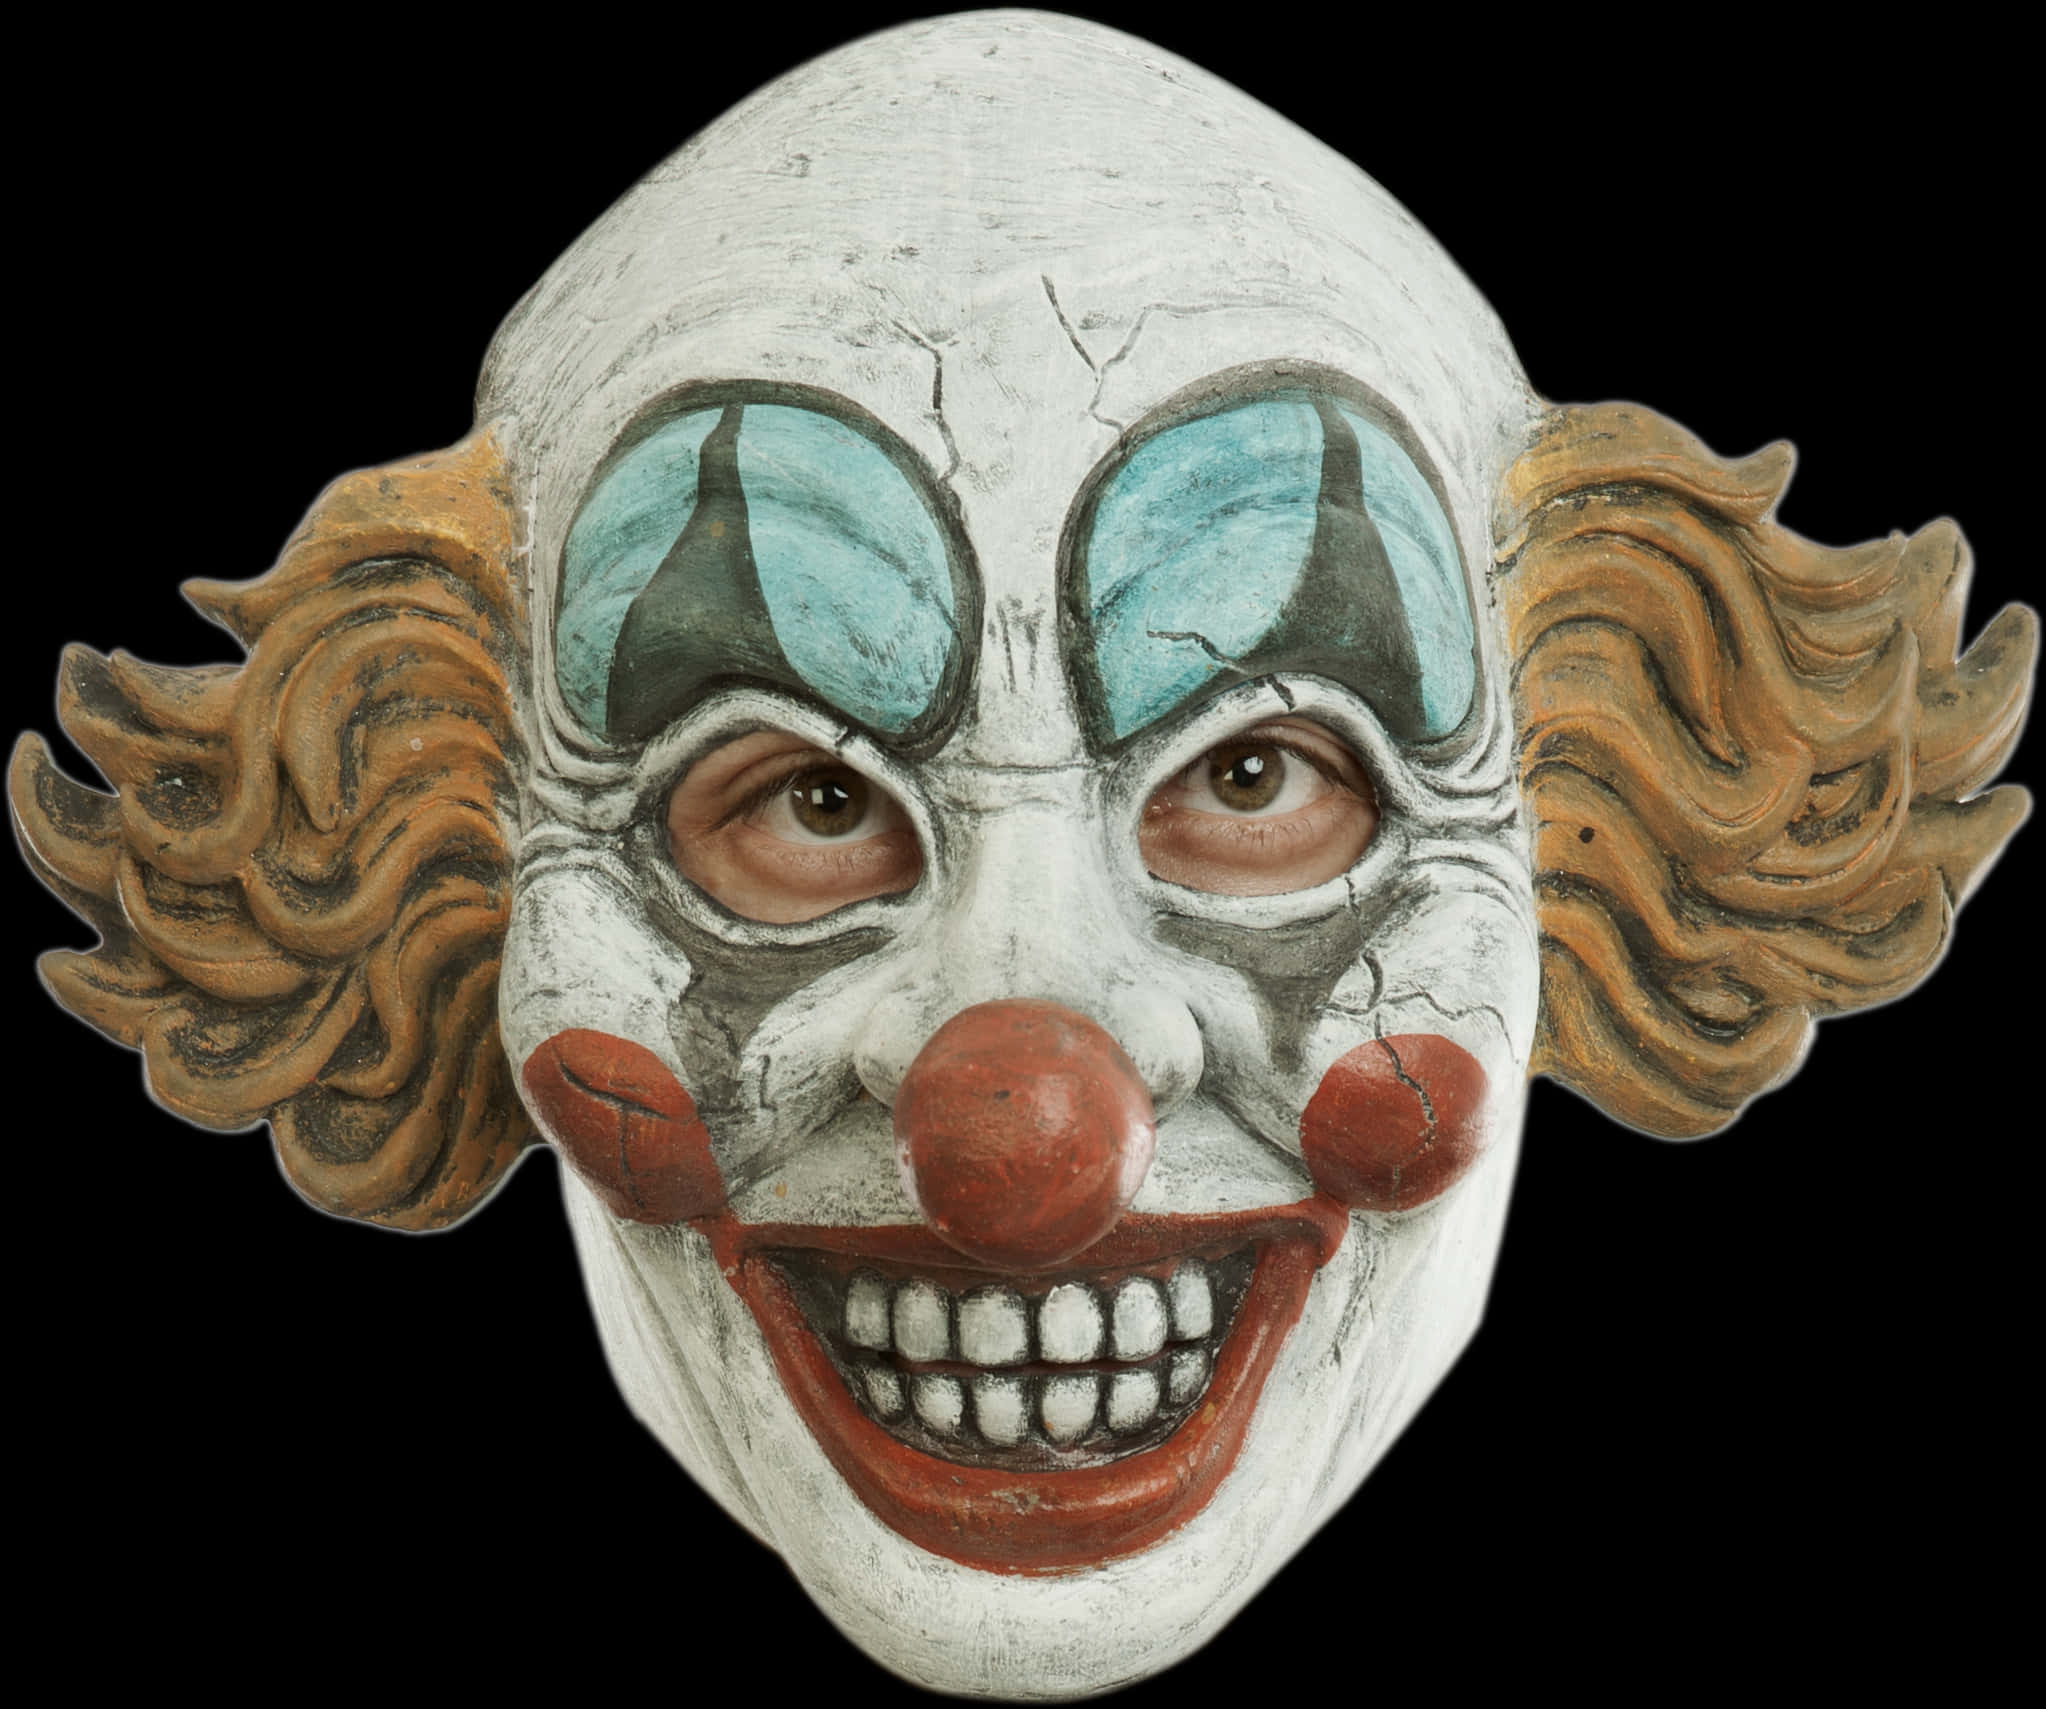 A Clown Mask With A Black Background